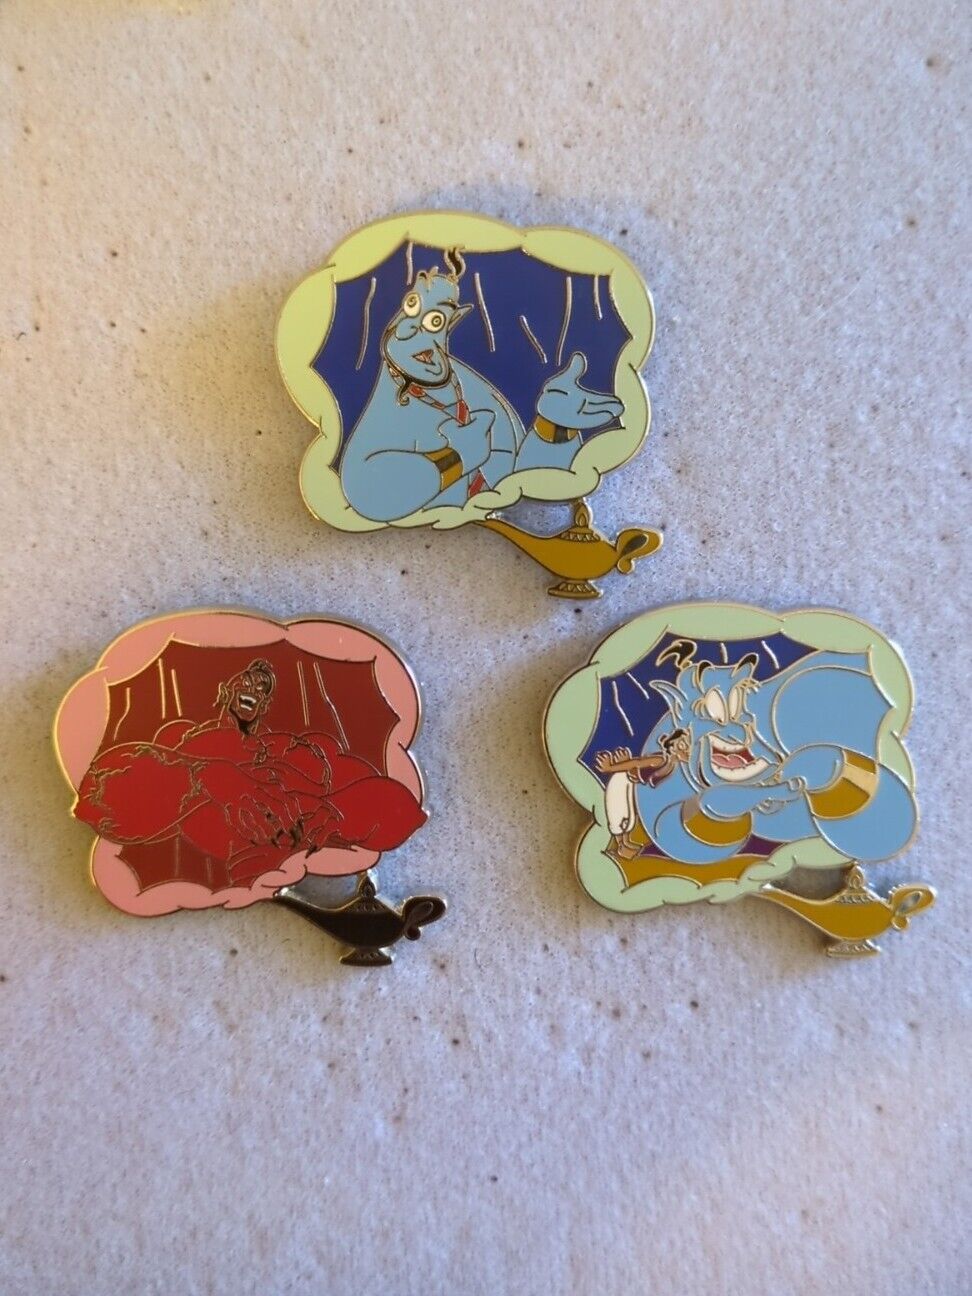 Aladdin Genie 30th Anniversary Limited Release mystery Disney Pin Lot Of 3